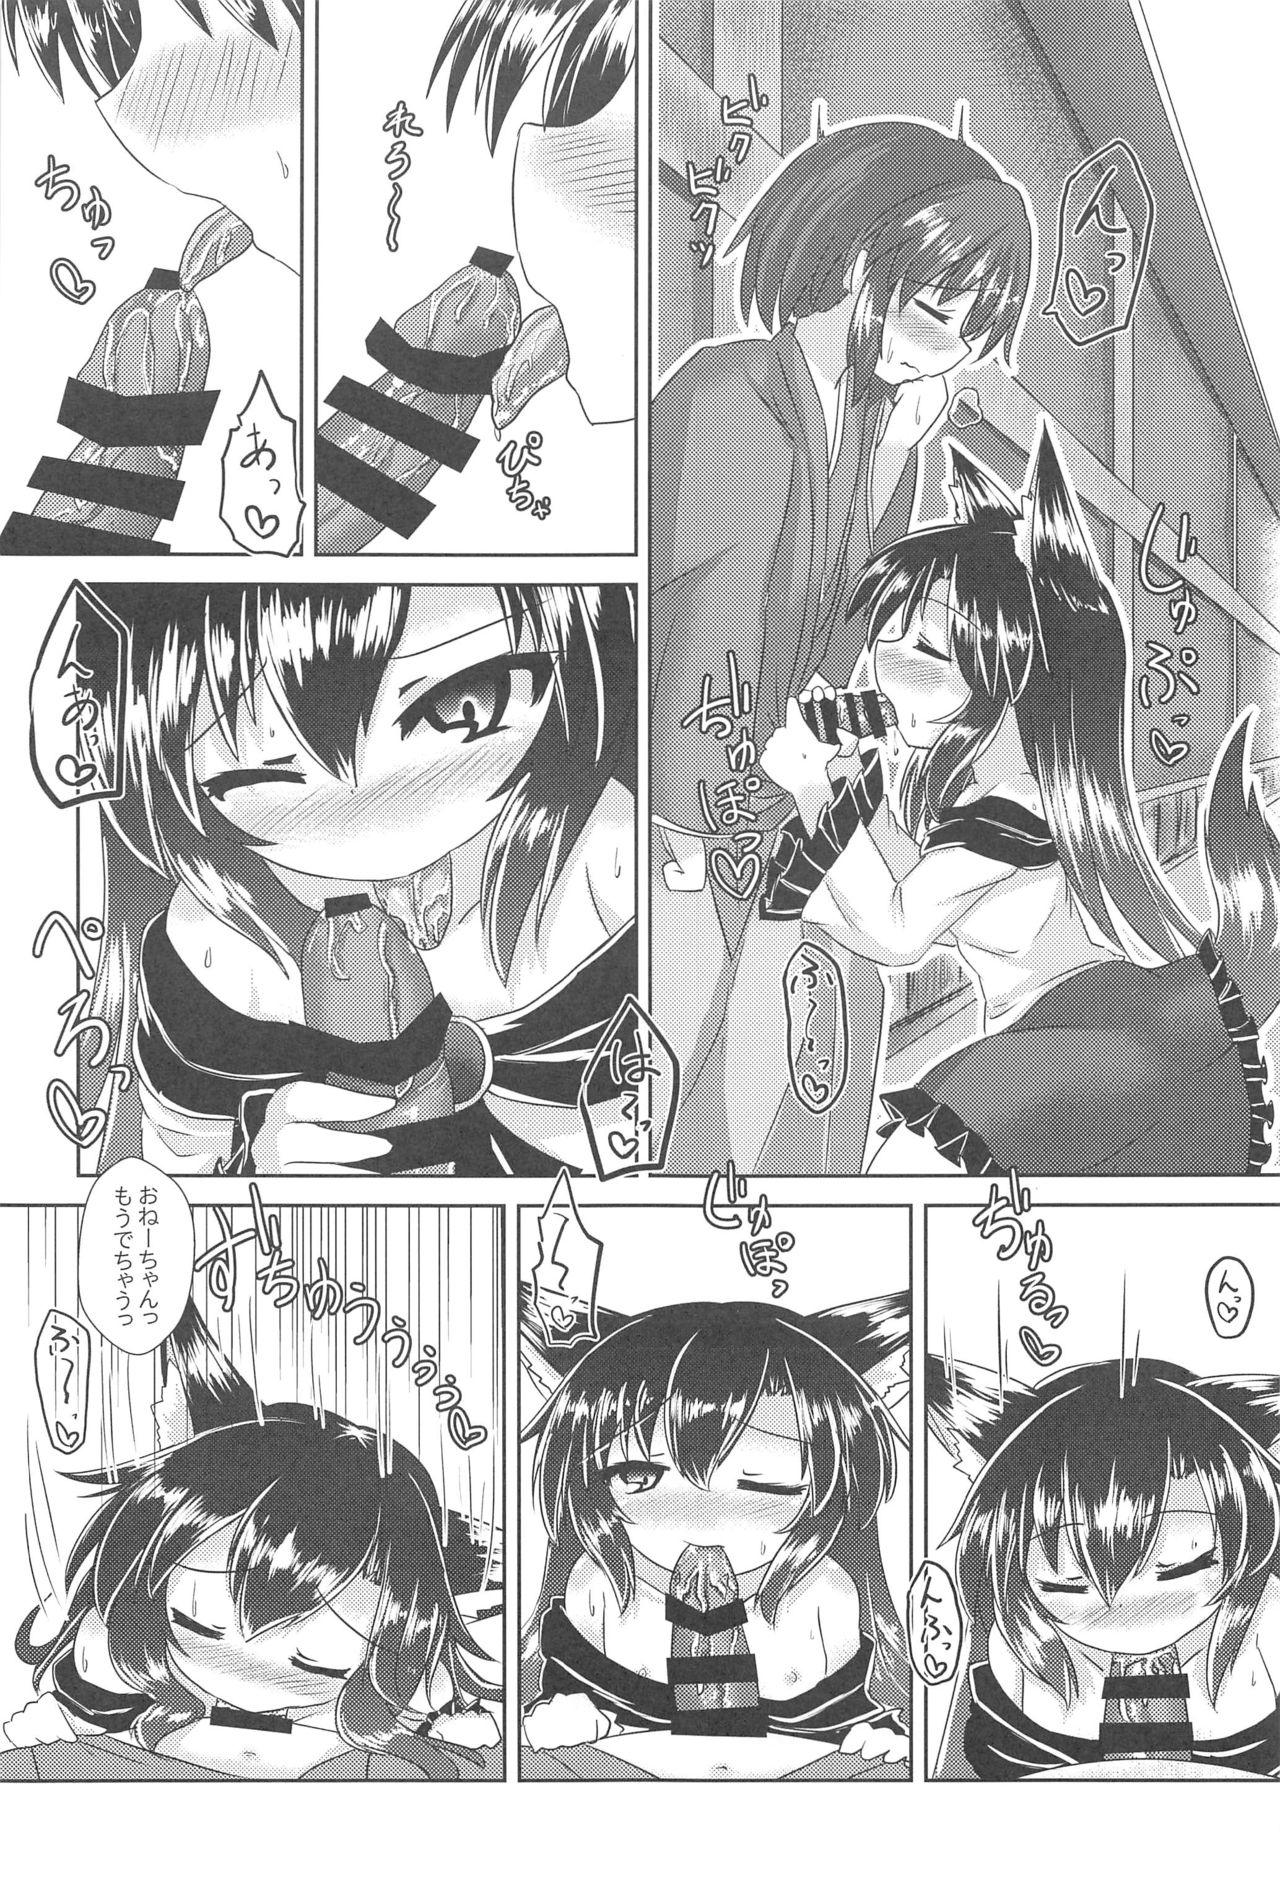 Eating Pussy 路地裏のルーガルー - Touhou project Twinks - Page 8